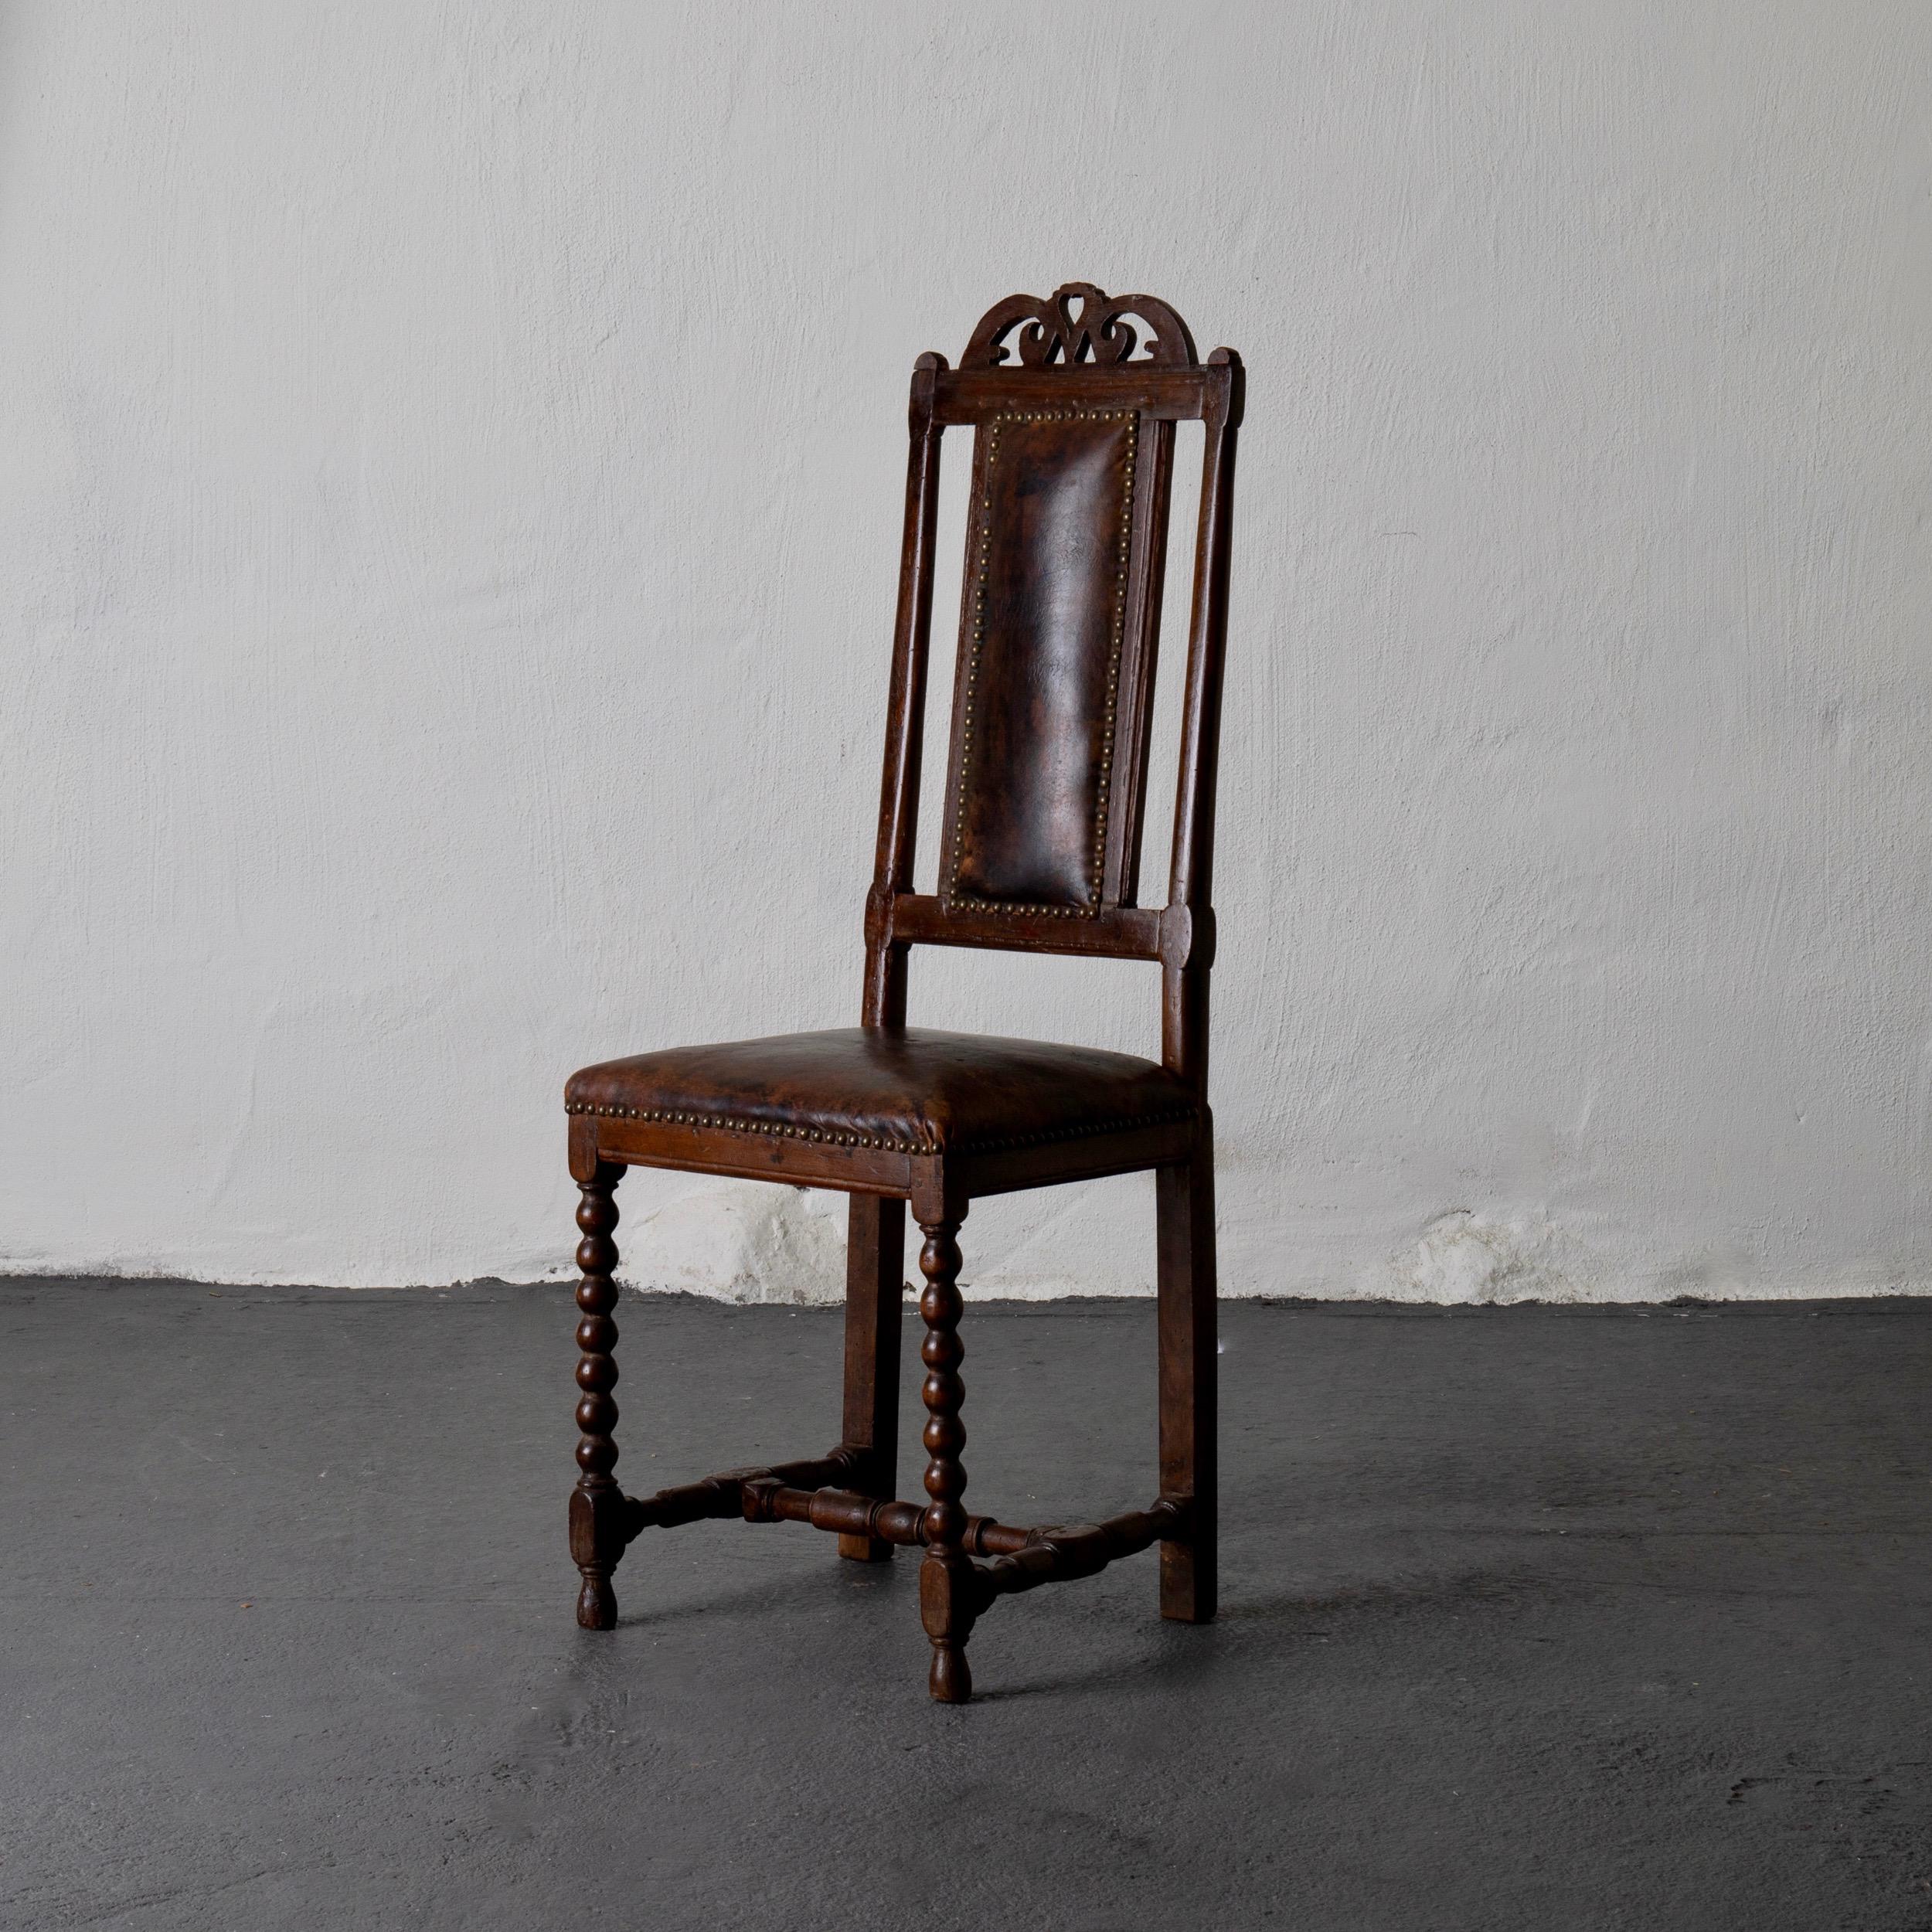 Chair Baroque Swedish brown leather Sweden. A side chair made during the Baroque period in Sweden, 1650-1750. Upholstered in a dark brown leather with brass nailheads. Beautiful patina on both frame and leather.